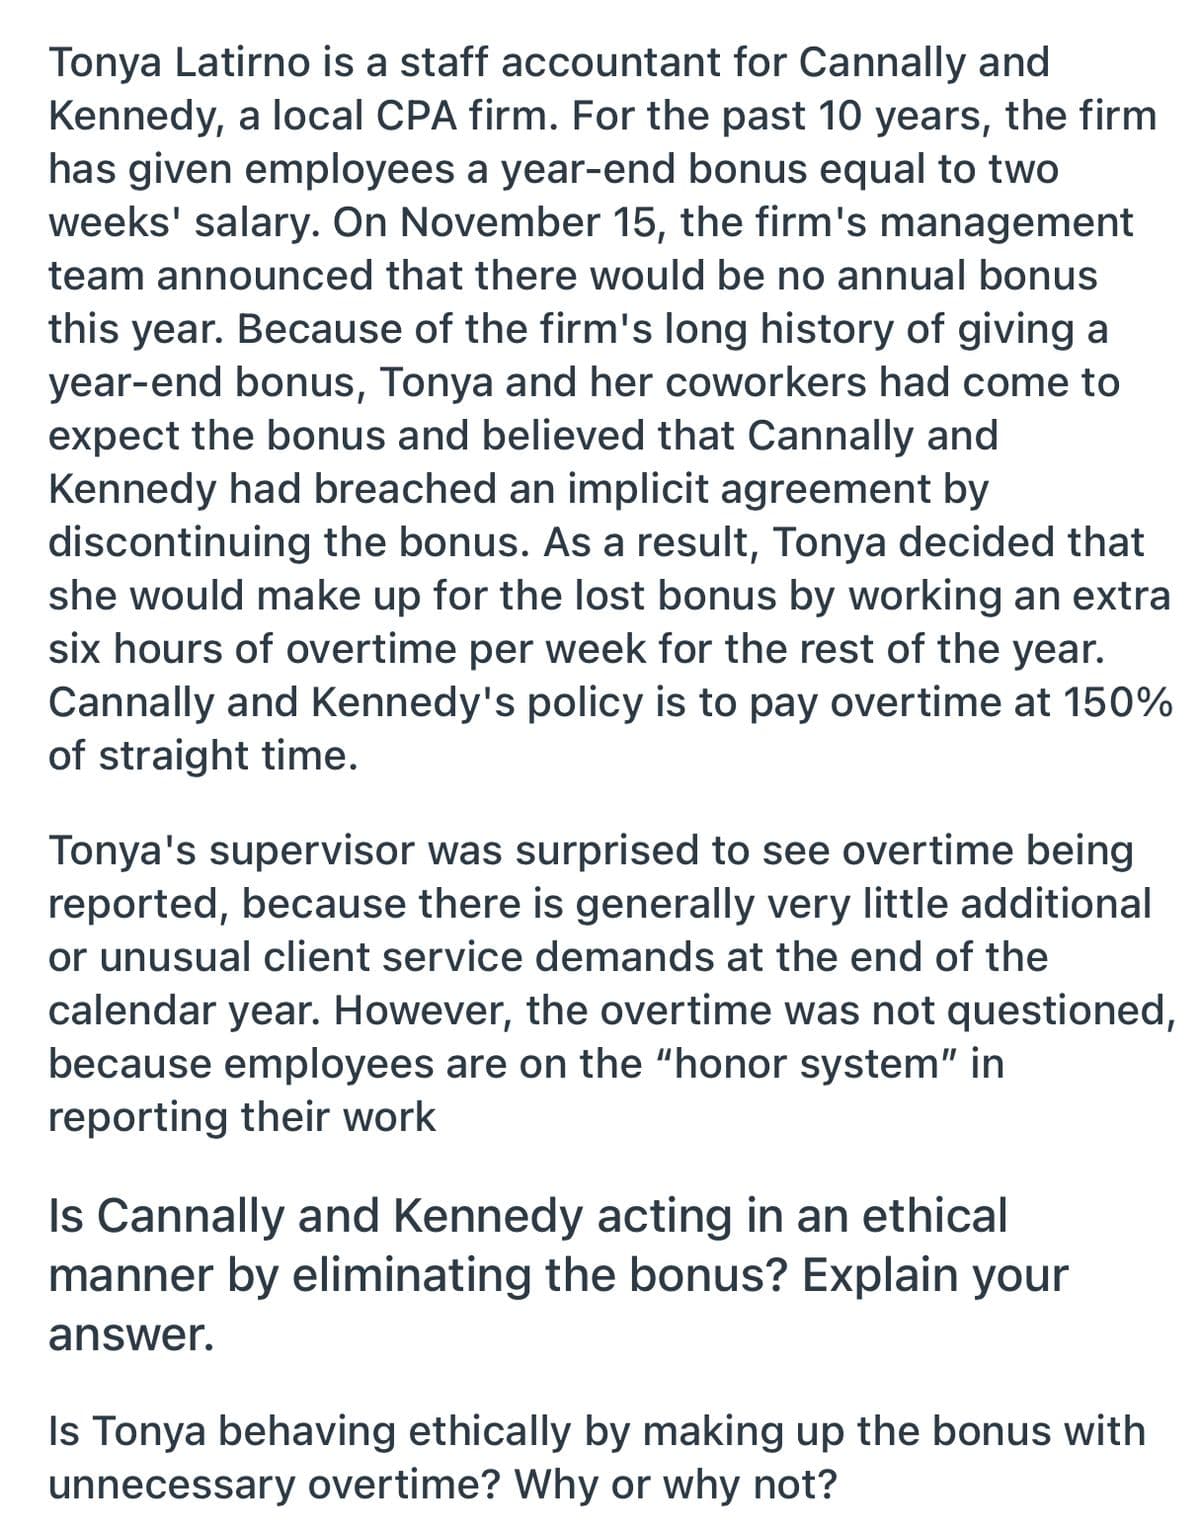 Tonya Latirno is a staff accountant for Cannally and
Kennedy, a local CPA firm. For the past 10 years, the firm
has given employees a year-end bonus equal to two
weeks' salary. On November 15, the firm's management
team announced that there would be no annual bonus
this year. Because of the firm's long history of giving a
year-end bonus, Tonya and her coworkers had come to
expect the bonus and believed that Cannally and
Kennedy had breached an implicit agreement by
discontinuing the bonus. As a result, Tonya decided that
she would make up for the lost bonus by working an extra
six hours of overtime per week for the rest of the year.
Cannally and Kennedy's policy is to pay overtime at 150%
of straight time.
Tonya's supervisor was surprised to see overtime being
reported, because there is generally very little additional
or unusual client service demands at the end of the
calendar year. However, the overtime was not questioned,
because employees are on the "honor system" in
reporting their work
Is Cannally and Kennedy acting in an ethical
manner by eliminating the bonus? Explain your
answer.
Is Tonya behaving ethically by making up the bonus with
unnecessary overtime? Why or why not?
